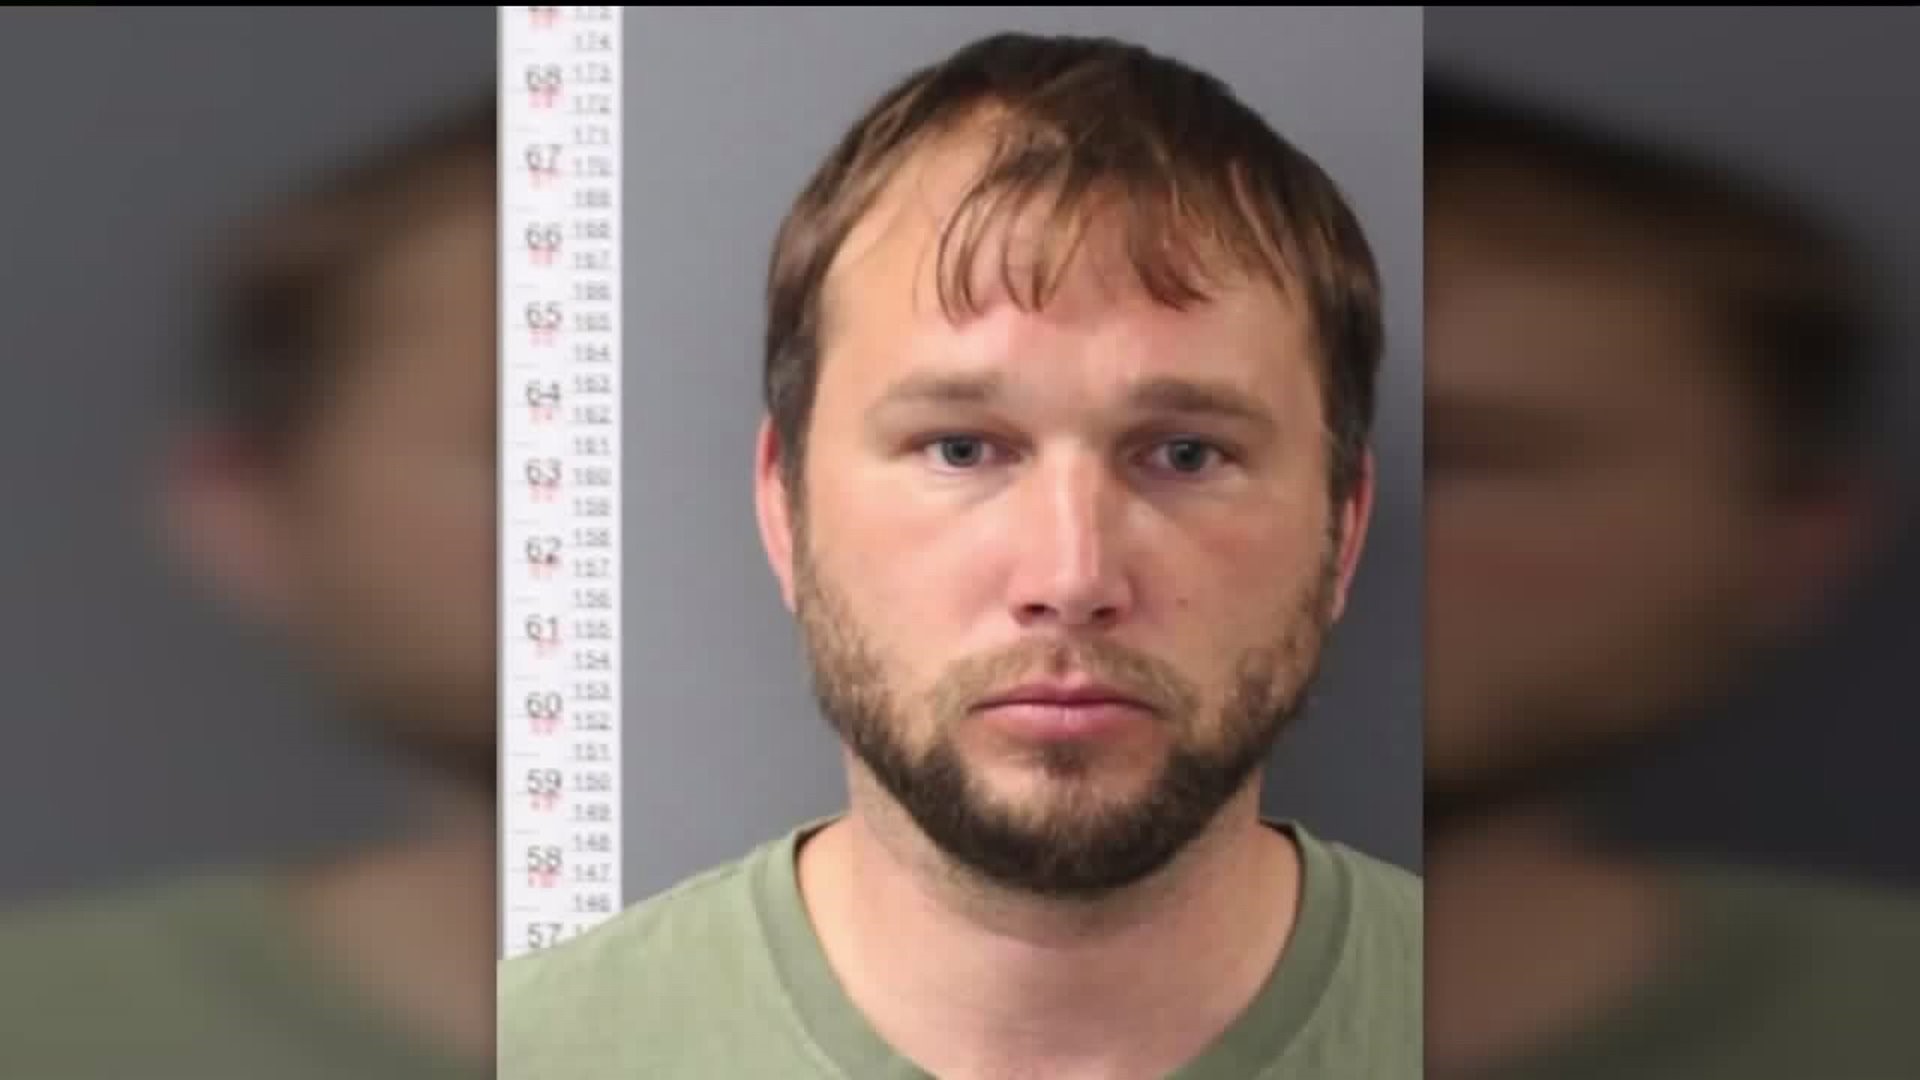 Bradford County Man Charged with Child Rape